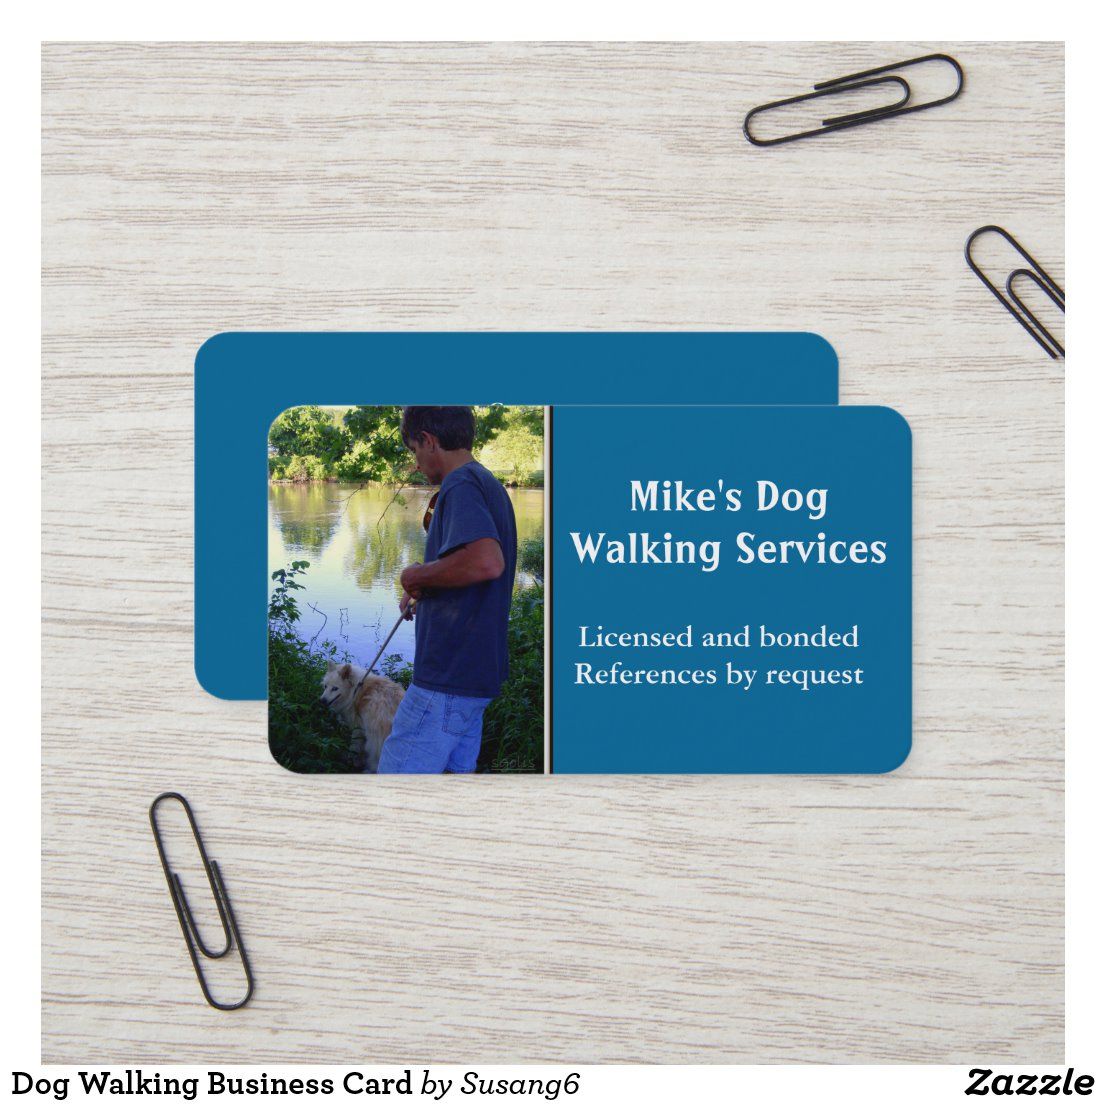 dog walking business cards ideas 8